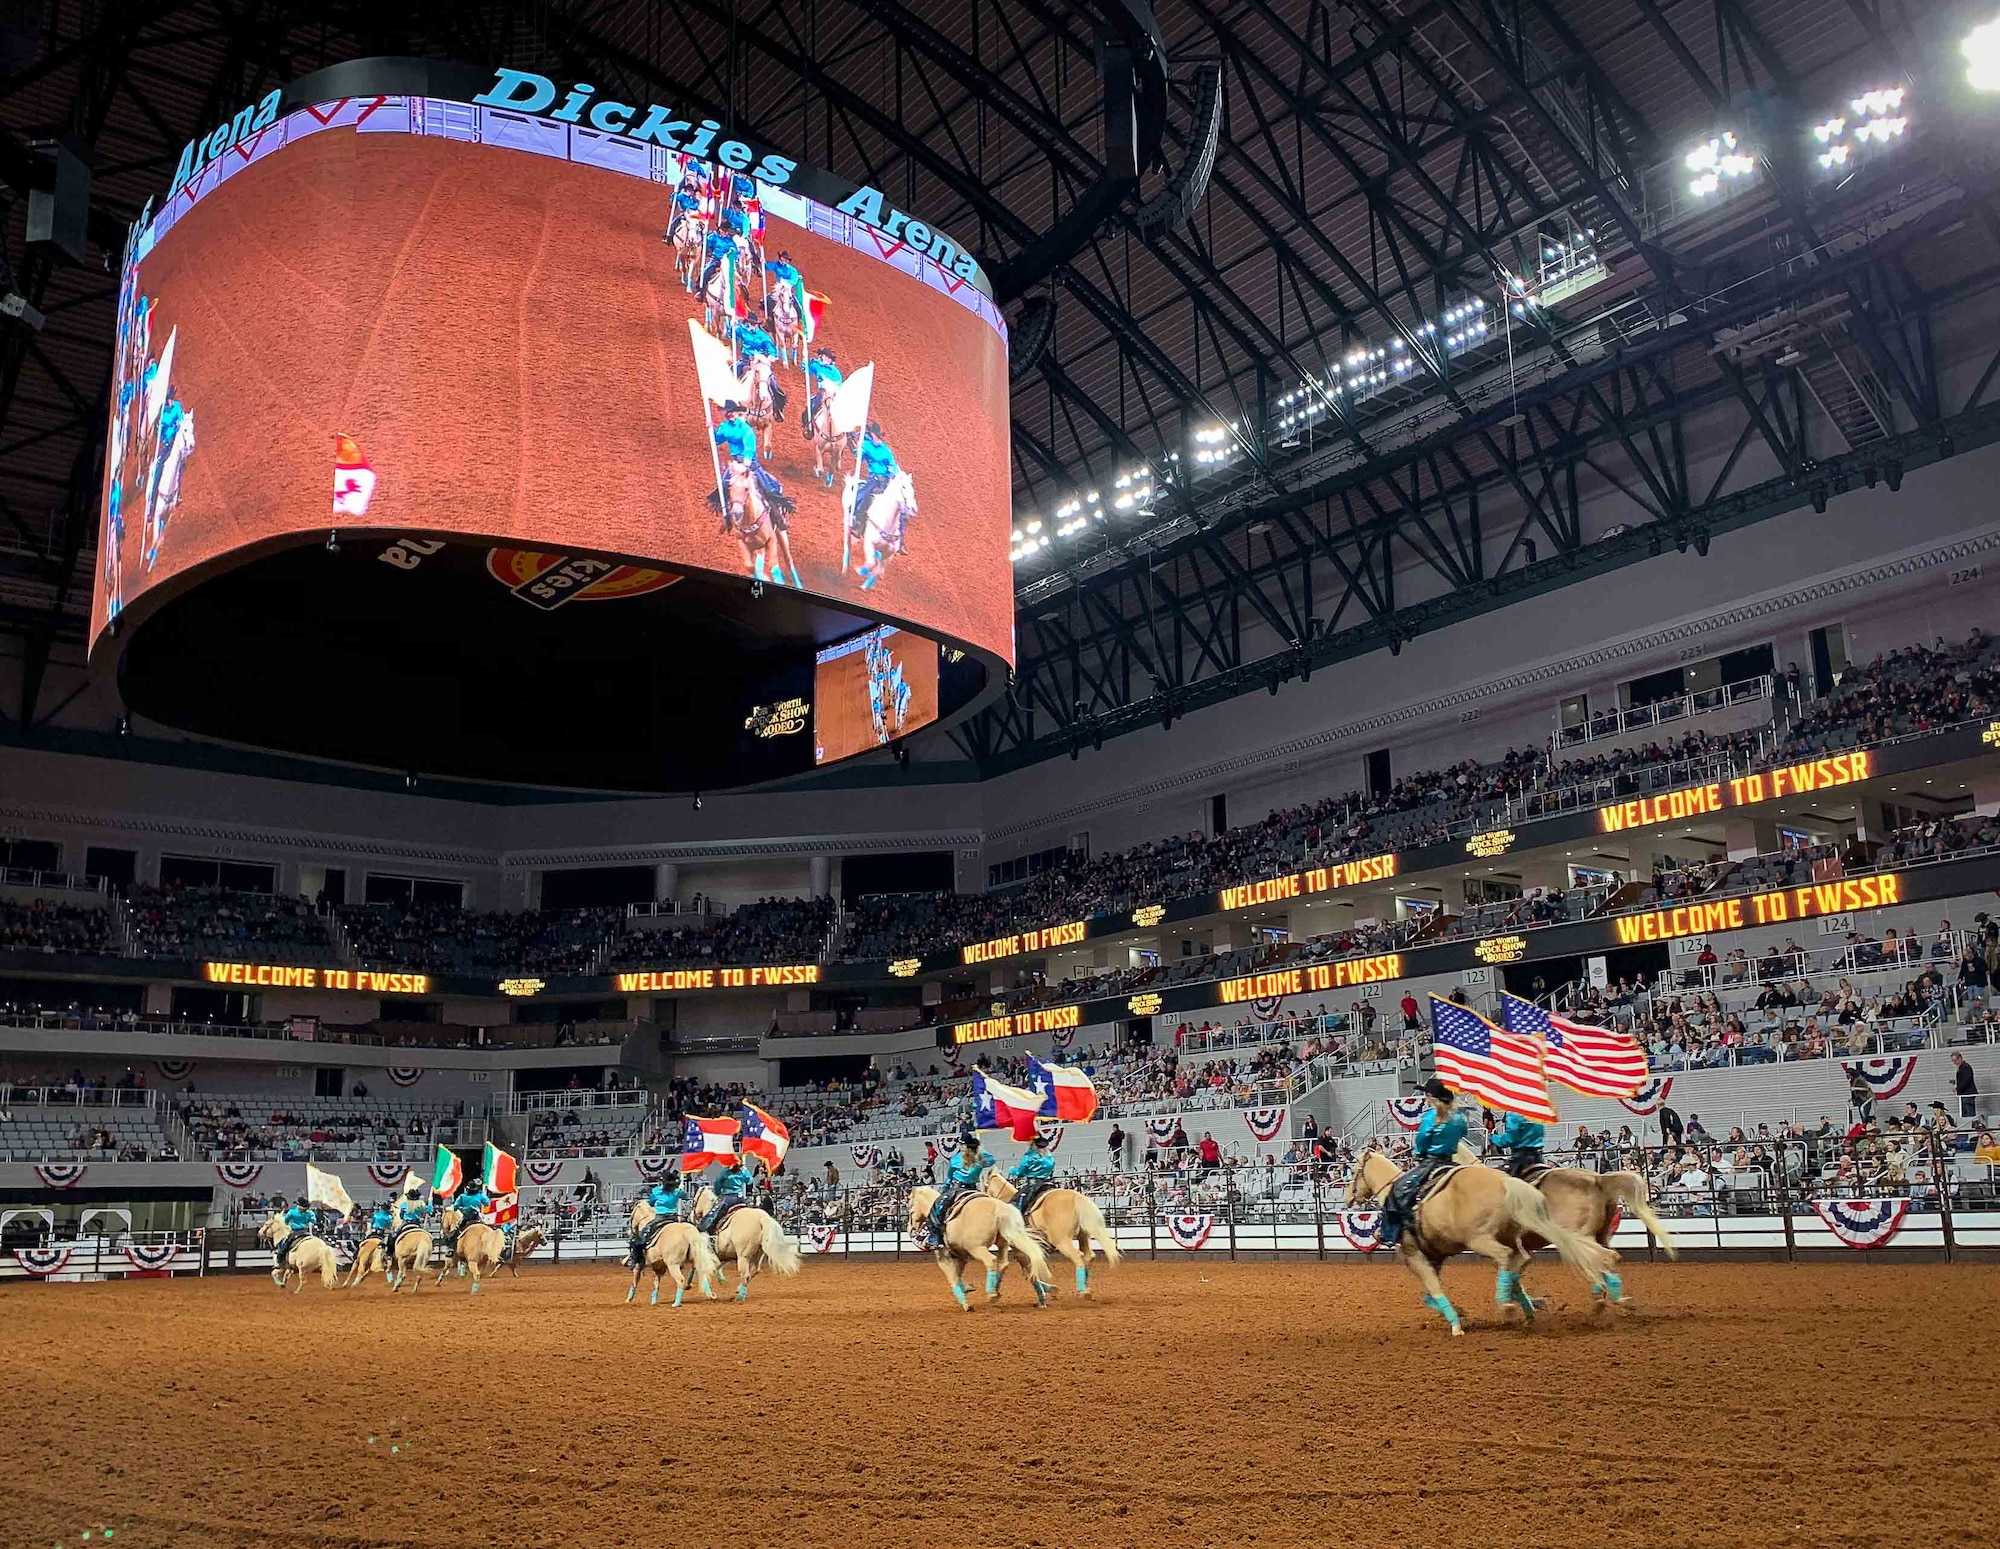 The six flags of Texas ride out on display  at the Fort Worth Stock Show and Rodeo at Dickie’s Arena on February 3, 2020. The FWSSR is the oldest continuously running livestock show and rodeo and has been held annually in Fort Worth, Texas since 1896. (U.S. Air Force Photo by Capt. Jessica Gross)